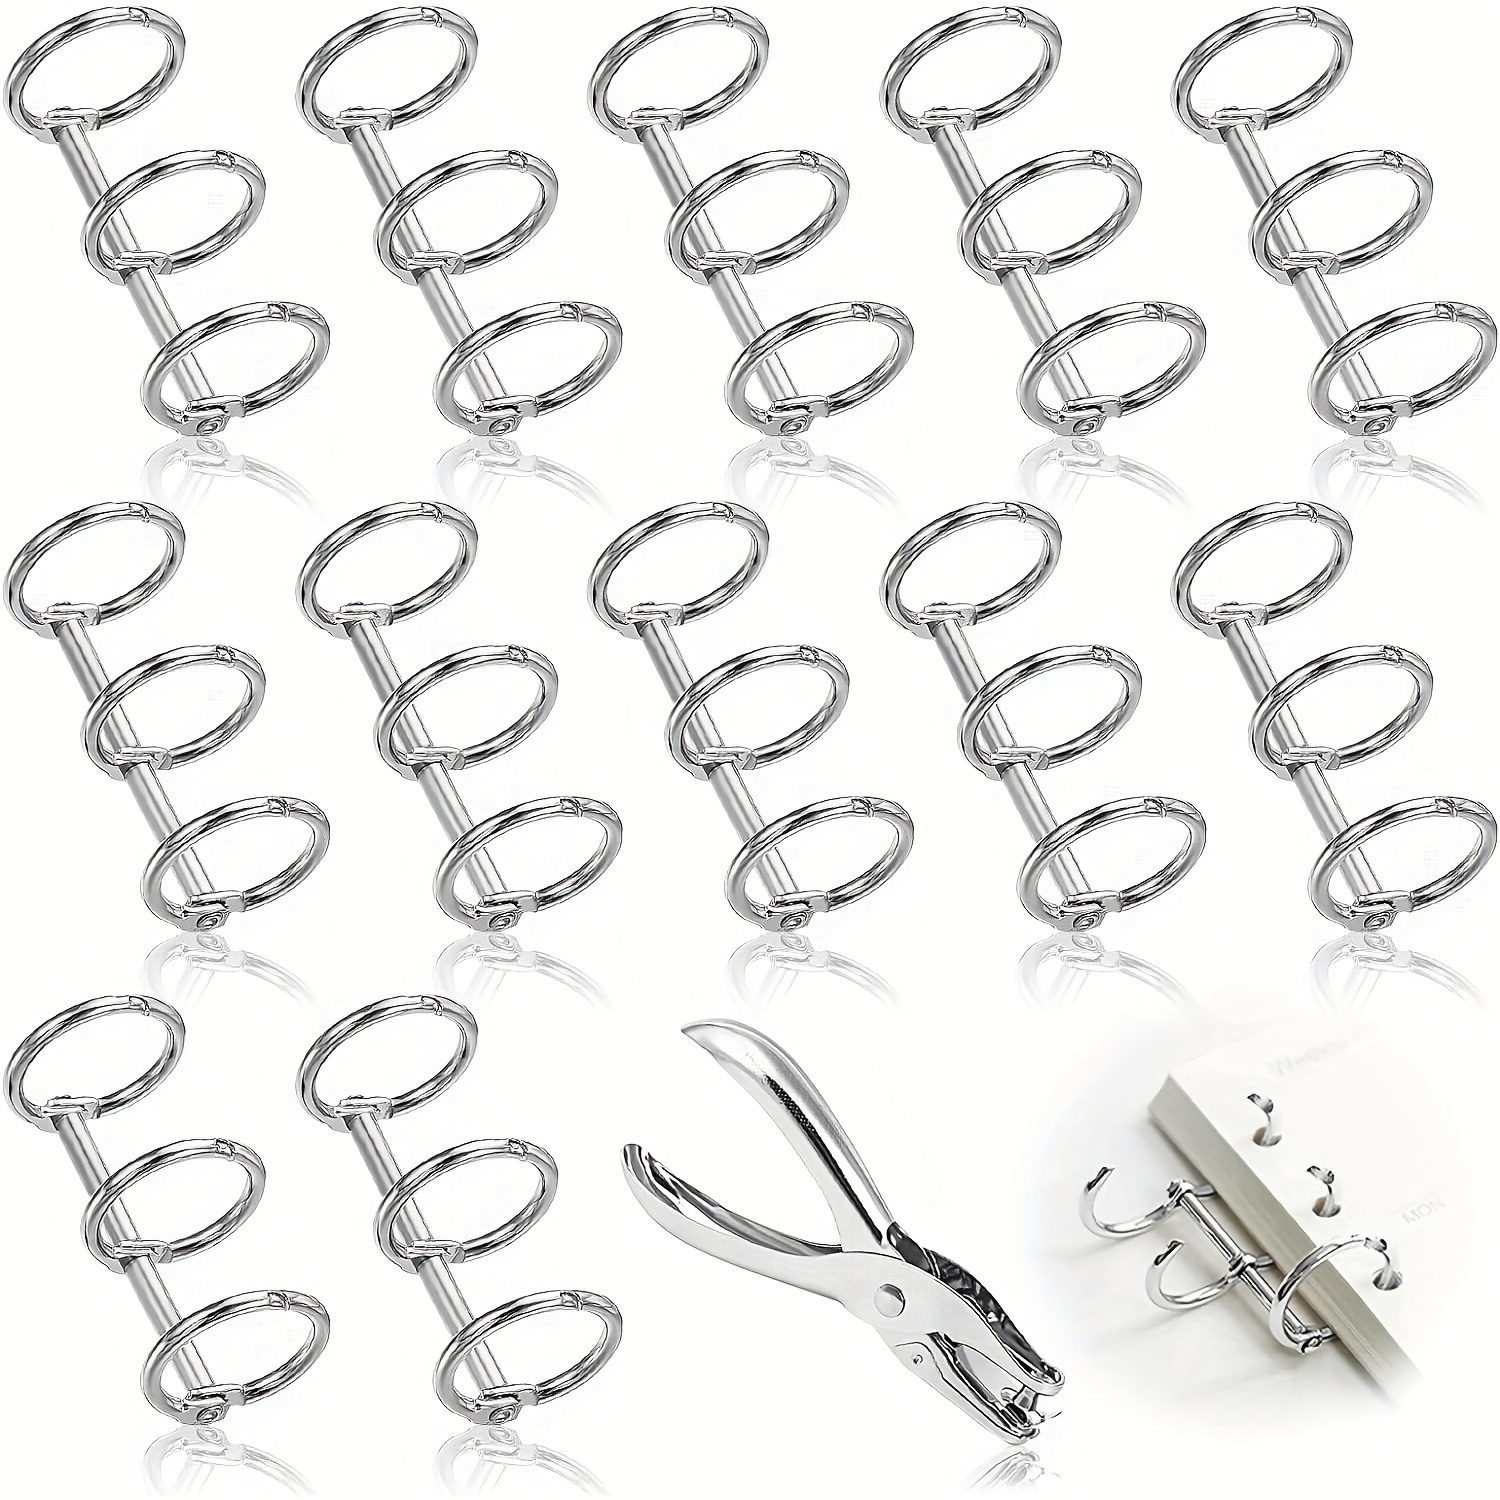 

12pcs, 3 Ring Binders, Reusable Book Rings With 1 Hole Pliers For Office, School, Home, Family, Diy Scrapbook, Album, Notebook, Index Cards